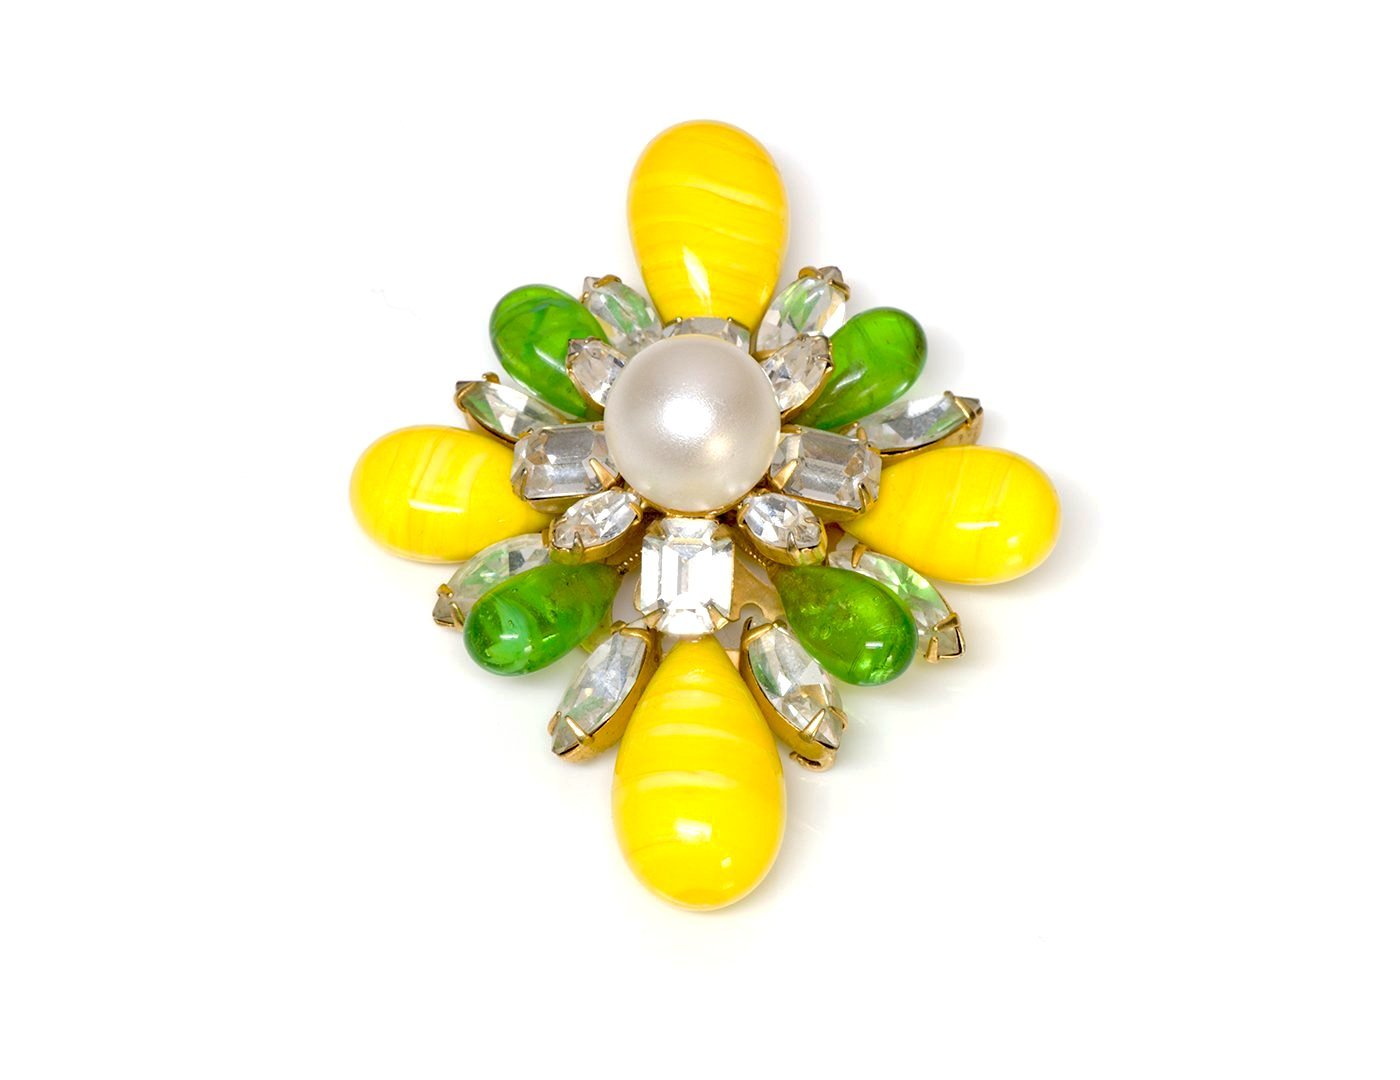 Vintage Arnold Scaasi Couture Yellow Green Glass Pearl Brooch